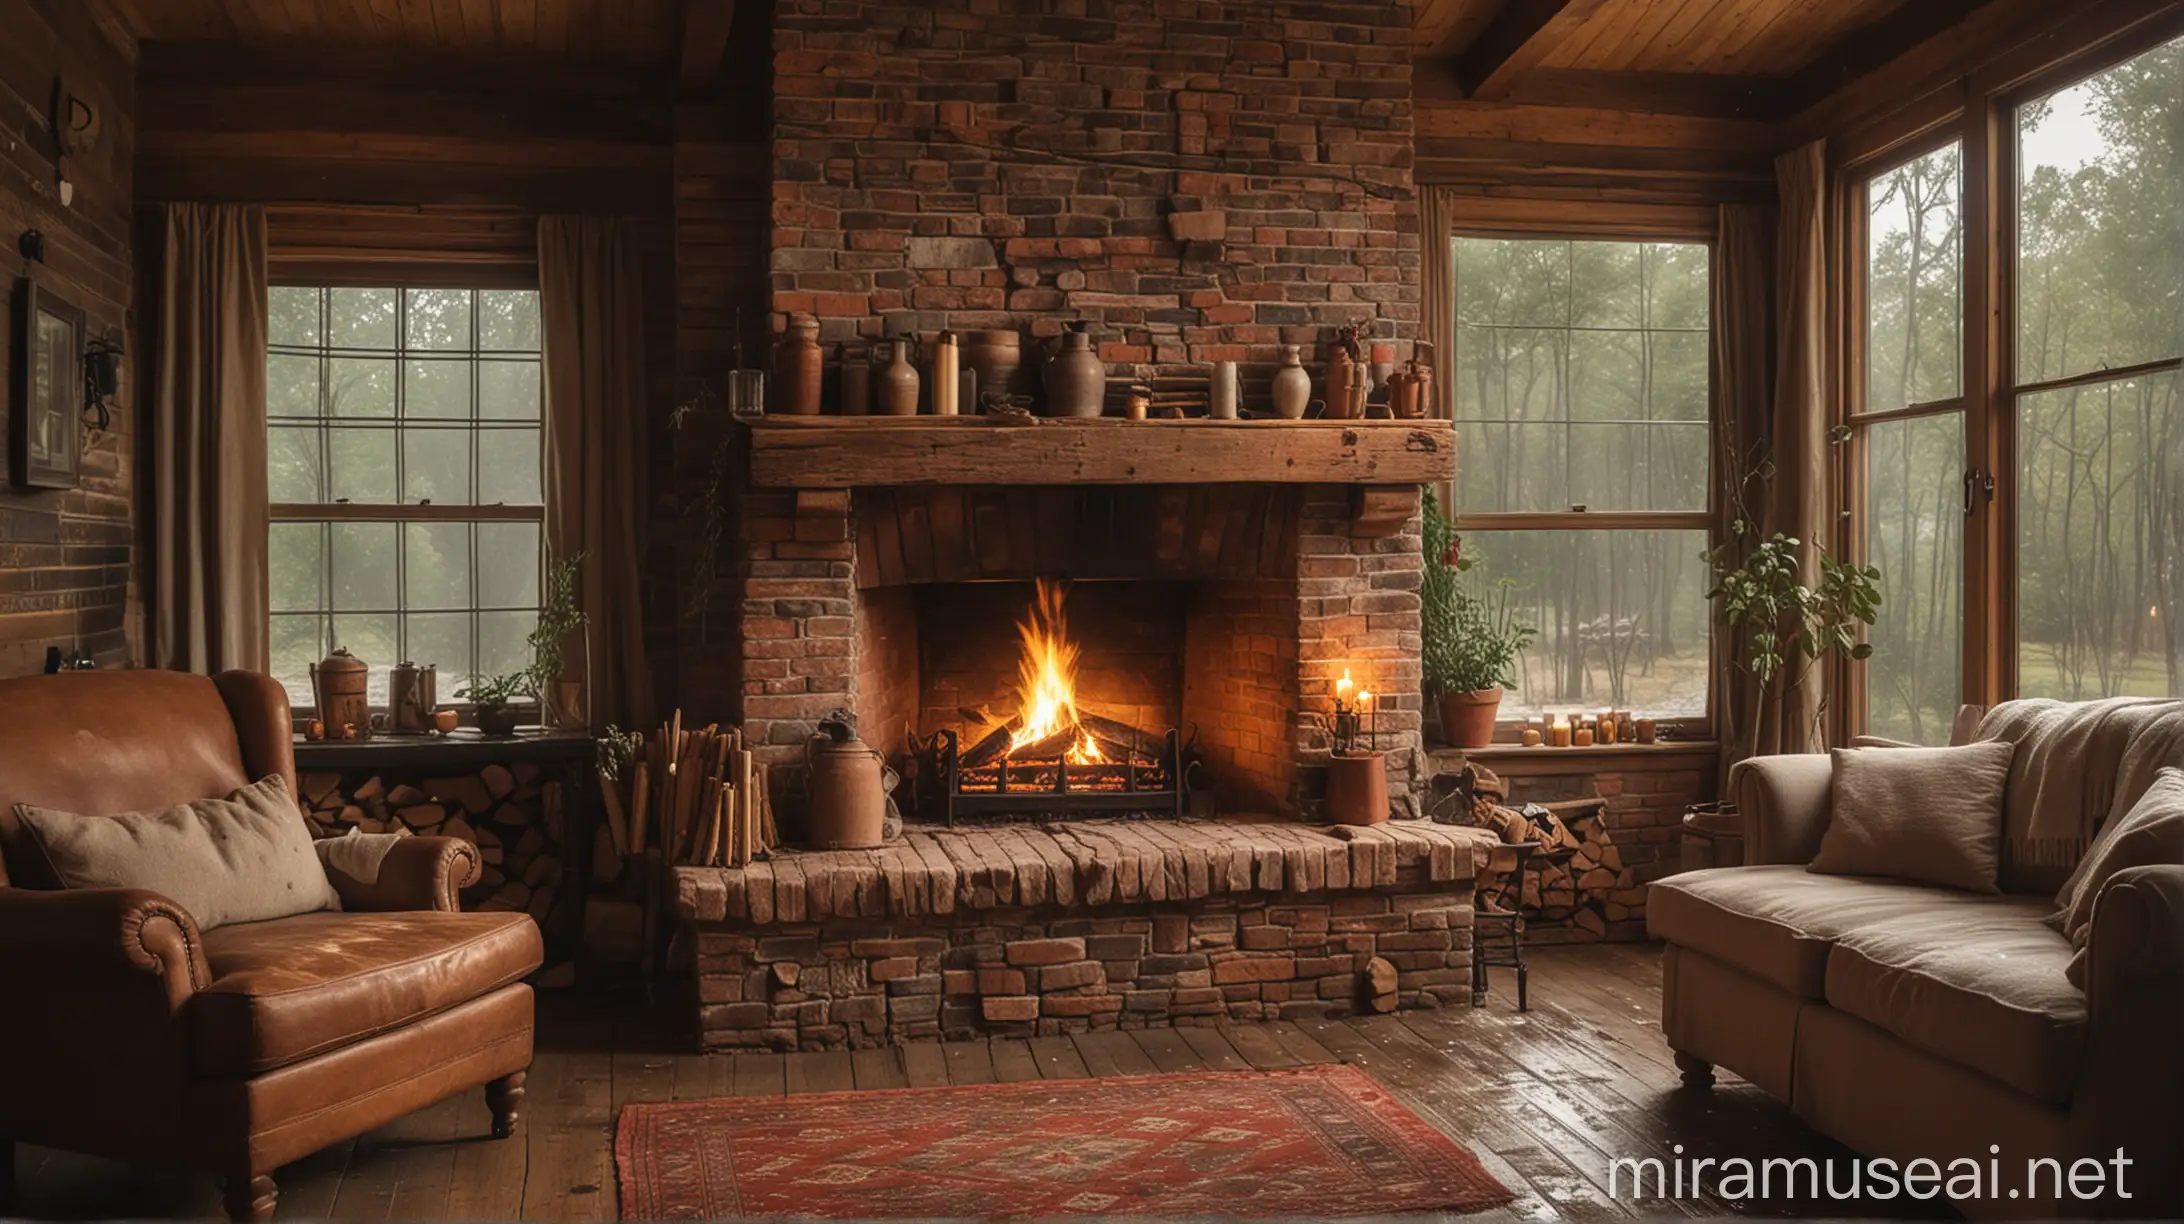 cozy cabin ambience, a brick fireplace burning wood with simple home furnishings and windows showing raindrops in the village